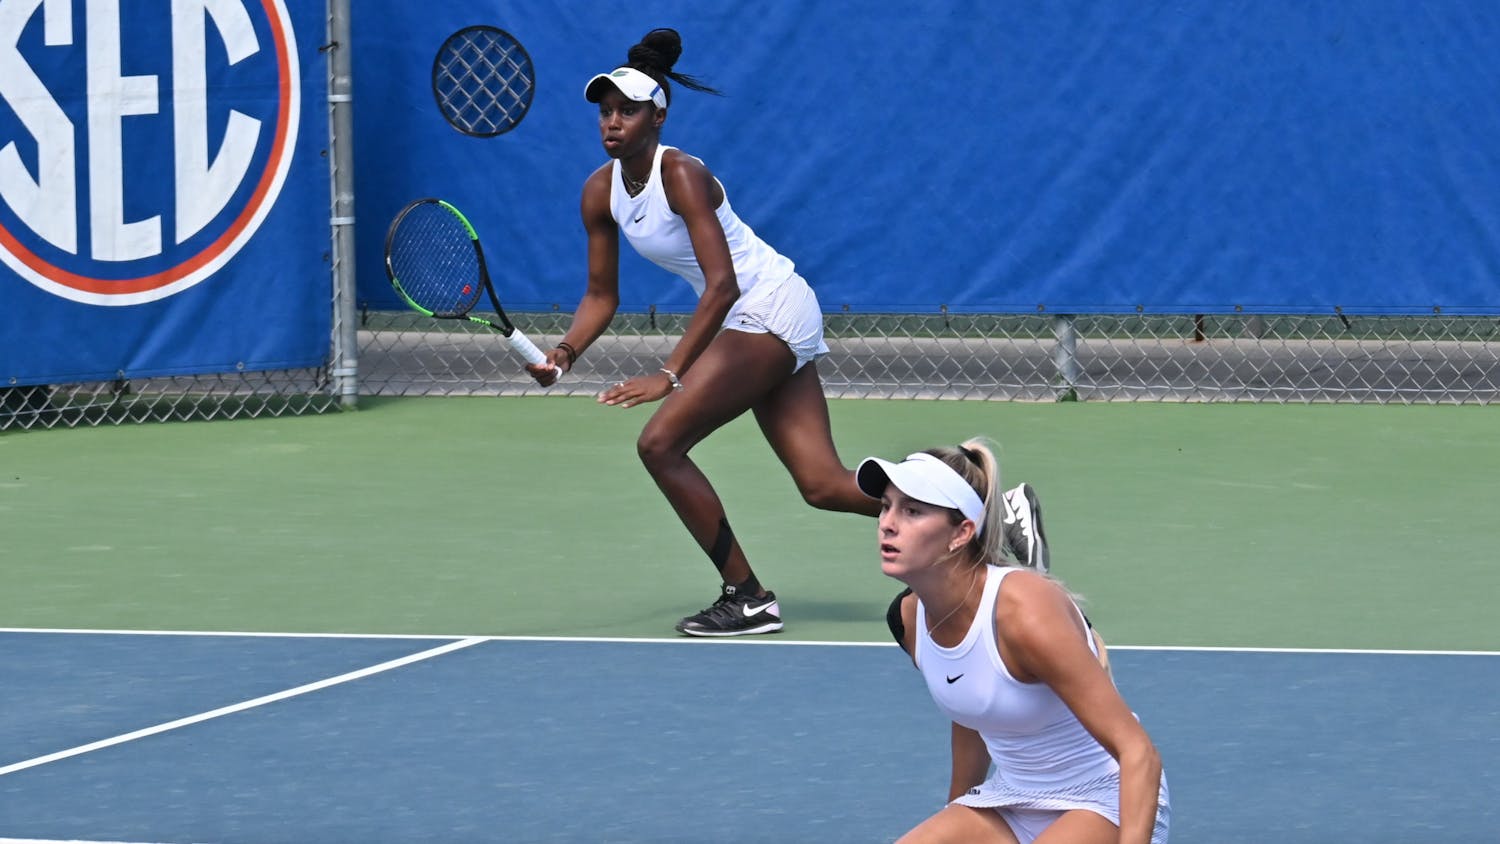 Junior Marlee Zein and senior McCartney Kessler against Arkansas on March 14, 2021. The Gators overcame the Mississippi State Bulldogs Sunday afternoon.